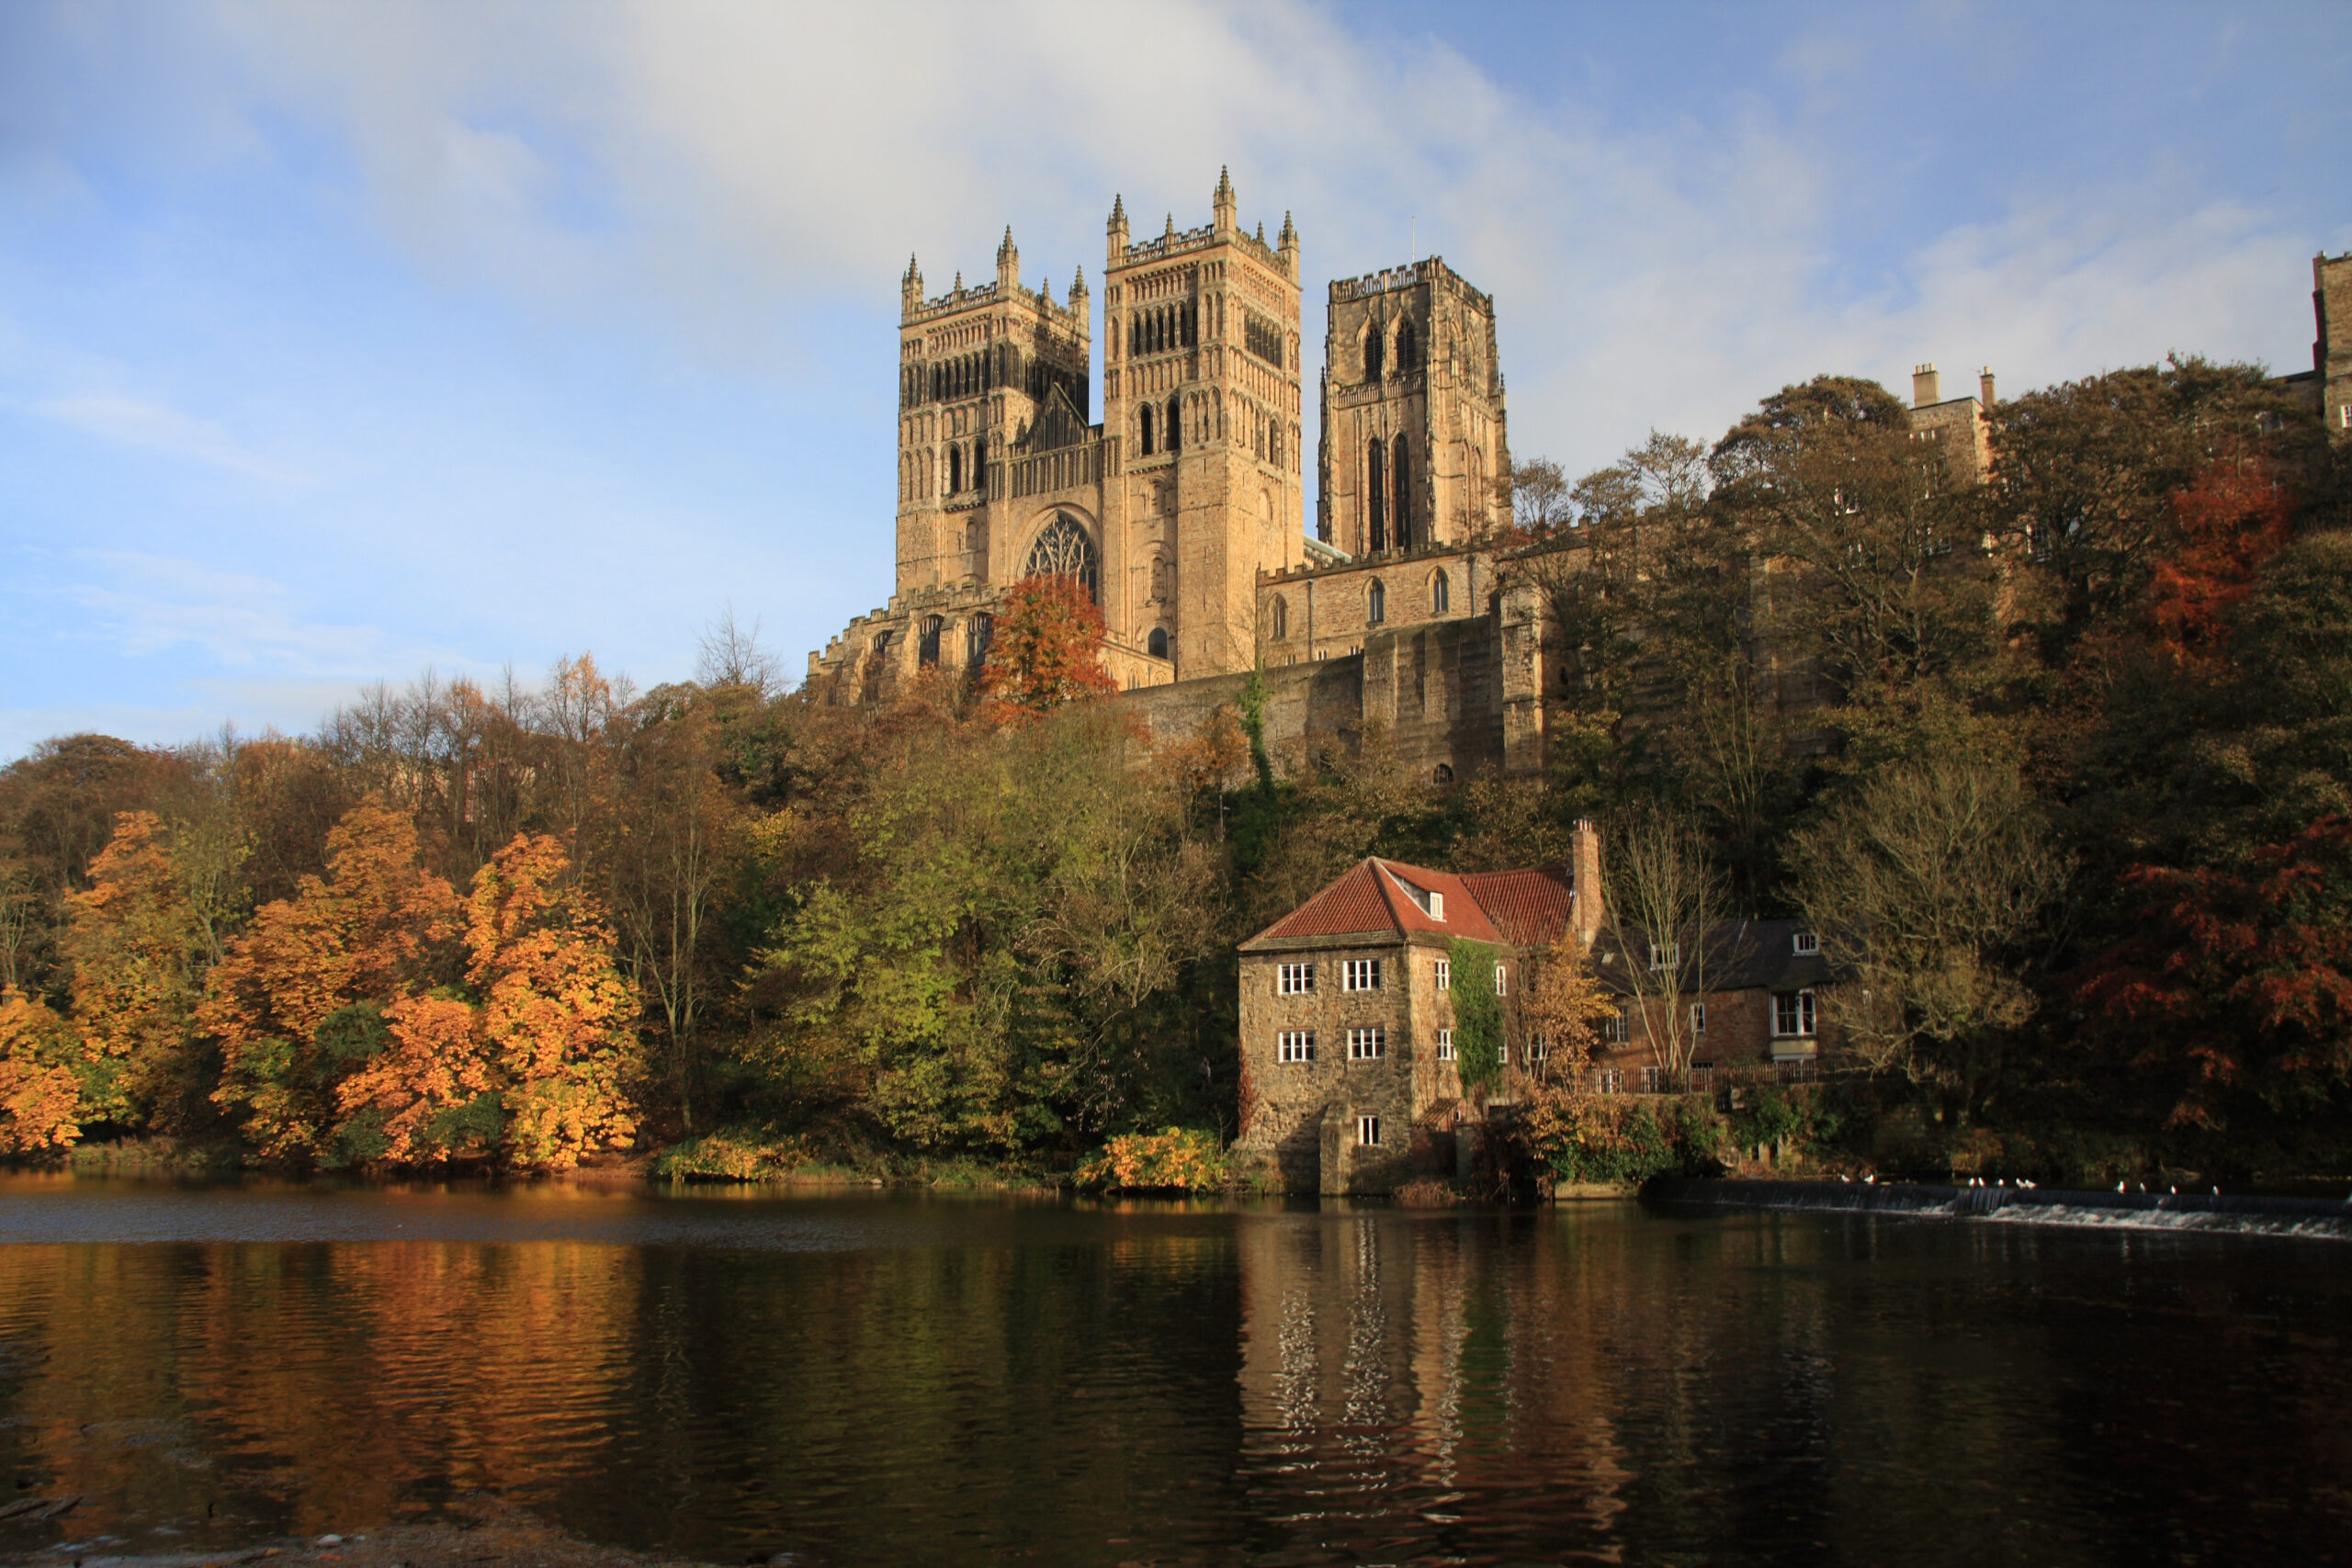 Image of a castle at the top of a hill with trees and a lake underneath in Durham where we provide Pat Testing